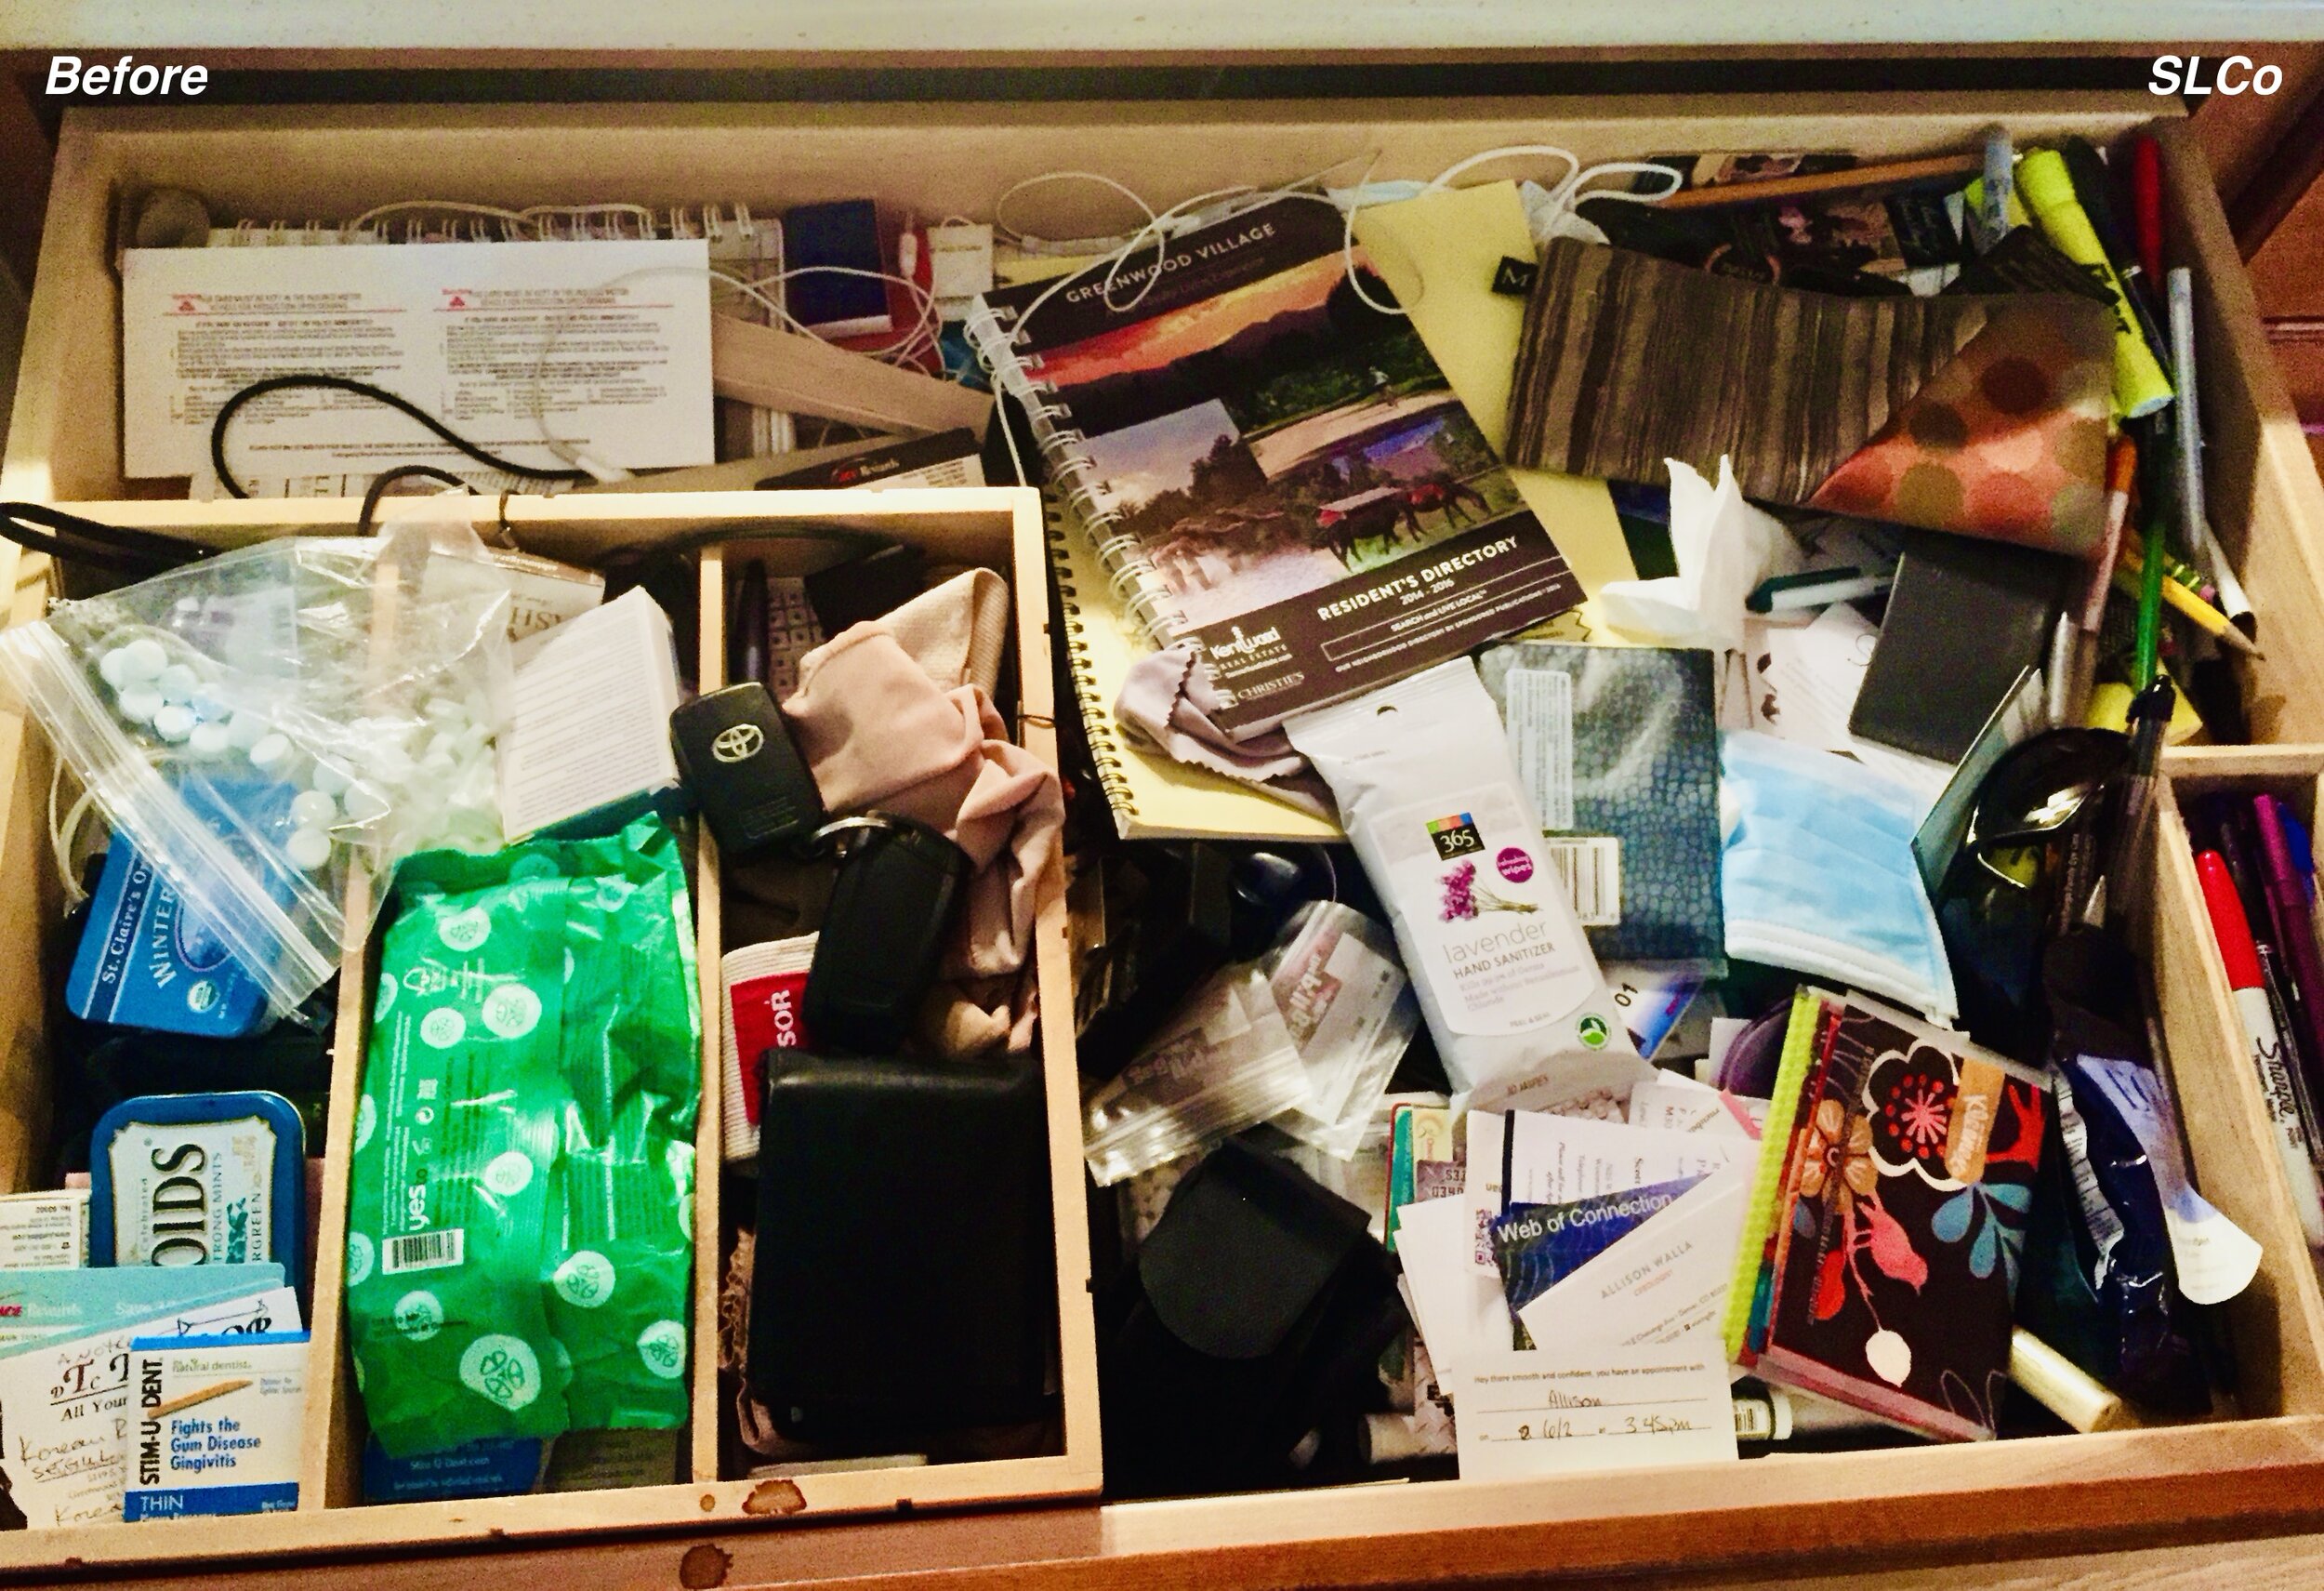 Before phot of a messy drawer with many items and can't see what's in drawer.